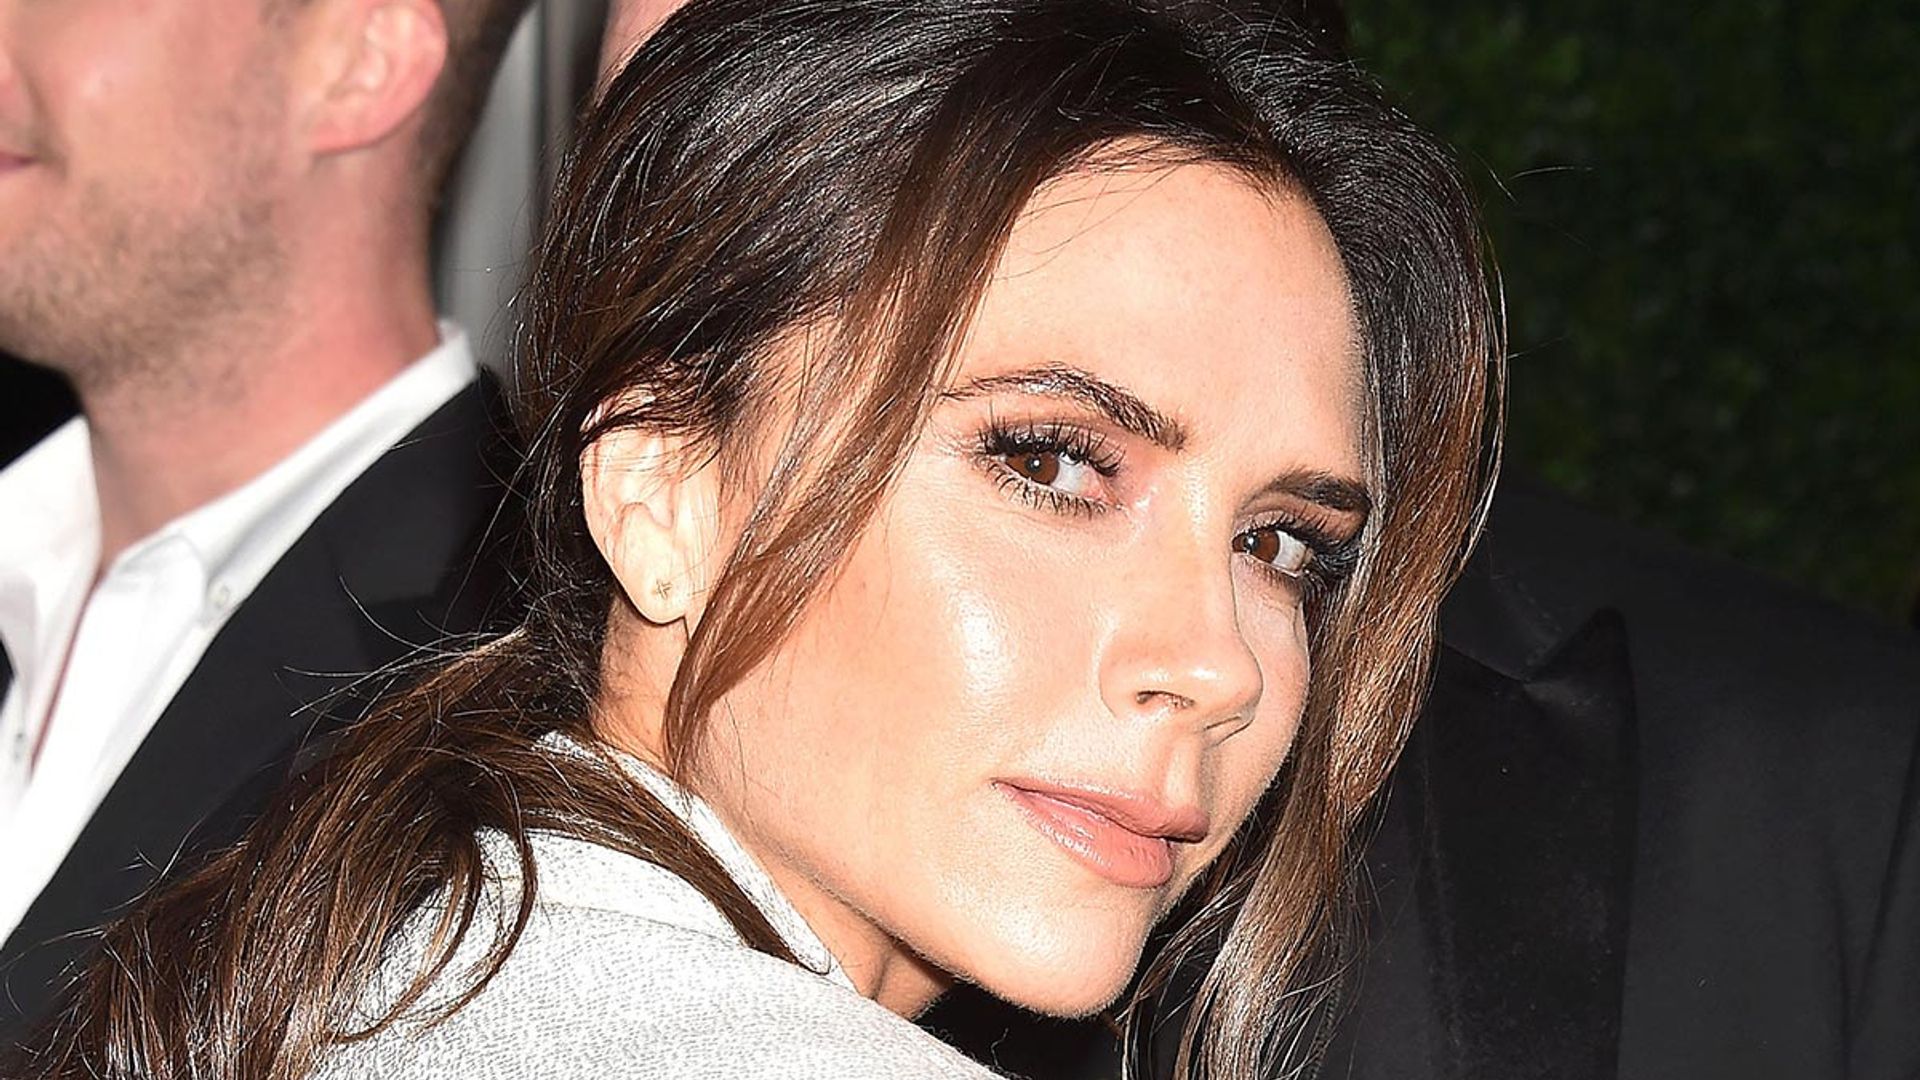 Victoria Beckham shows support for England team in sweetest way | HELLO!